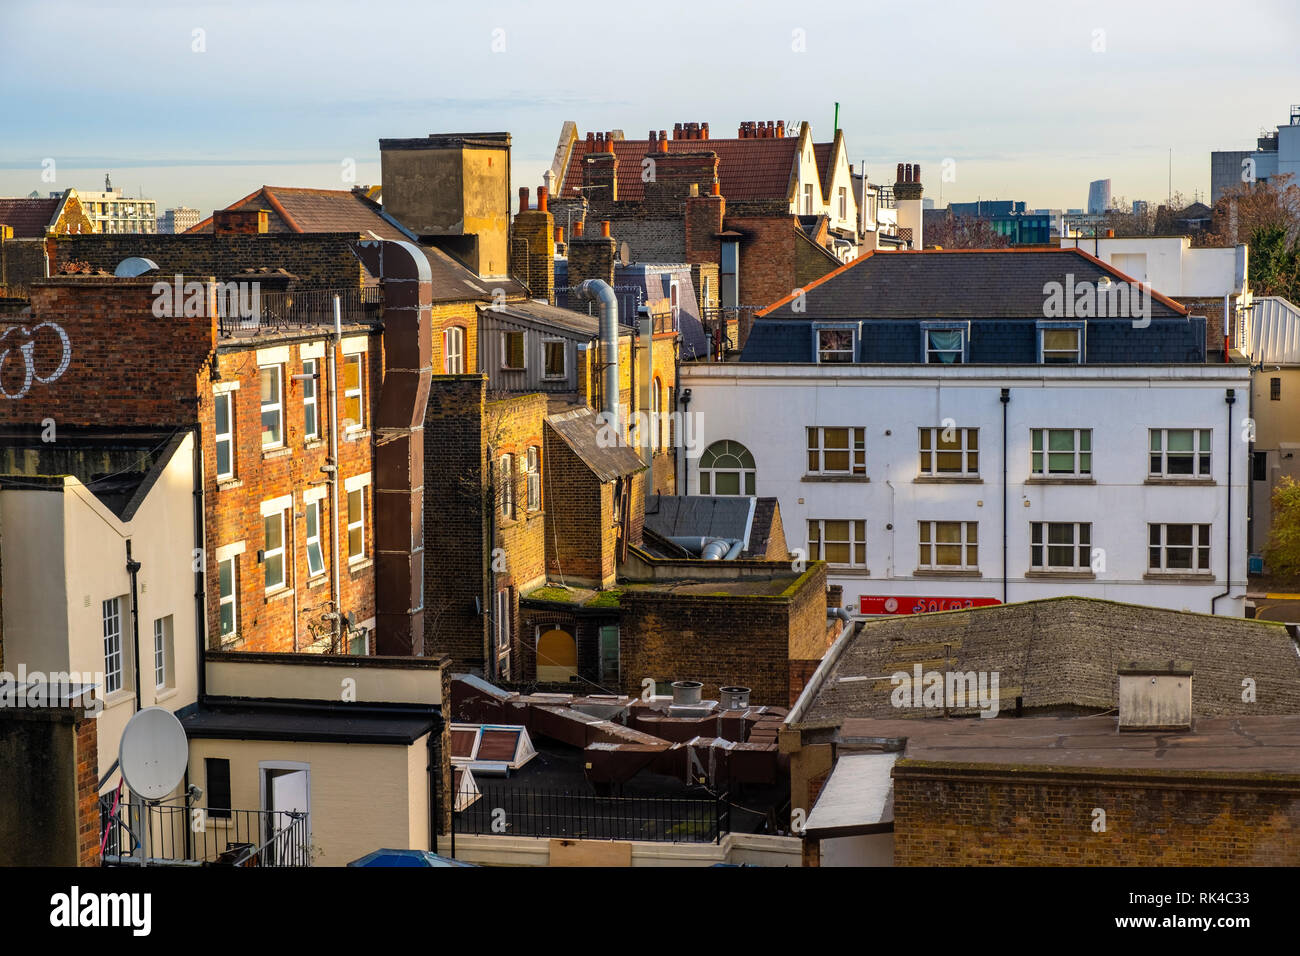 London, England / United Kingdom - 2019/01/29: Panoramic view of the Whitechapel district of East London with fusion of traditional and modernistic ar Stock Photo